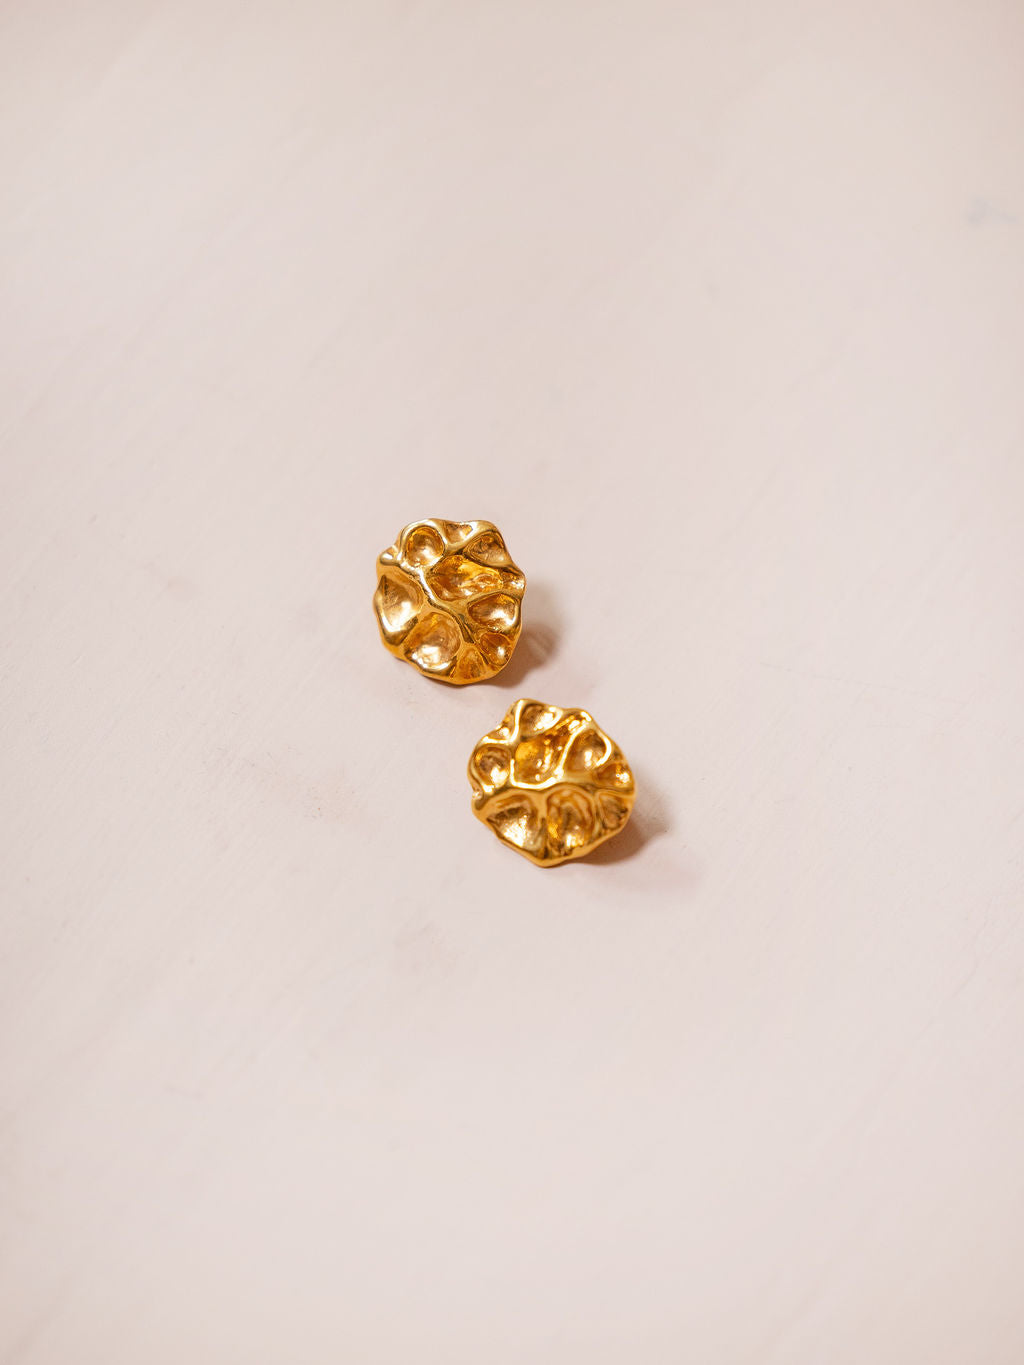 Small gold textured earrings on pink background